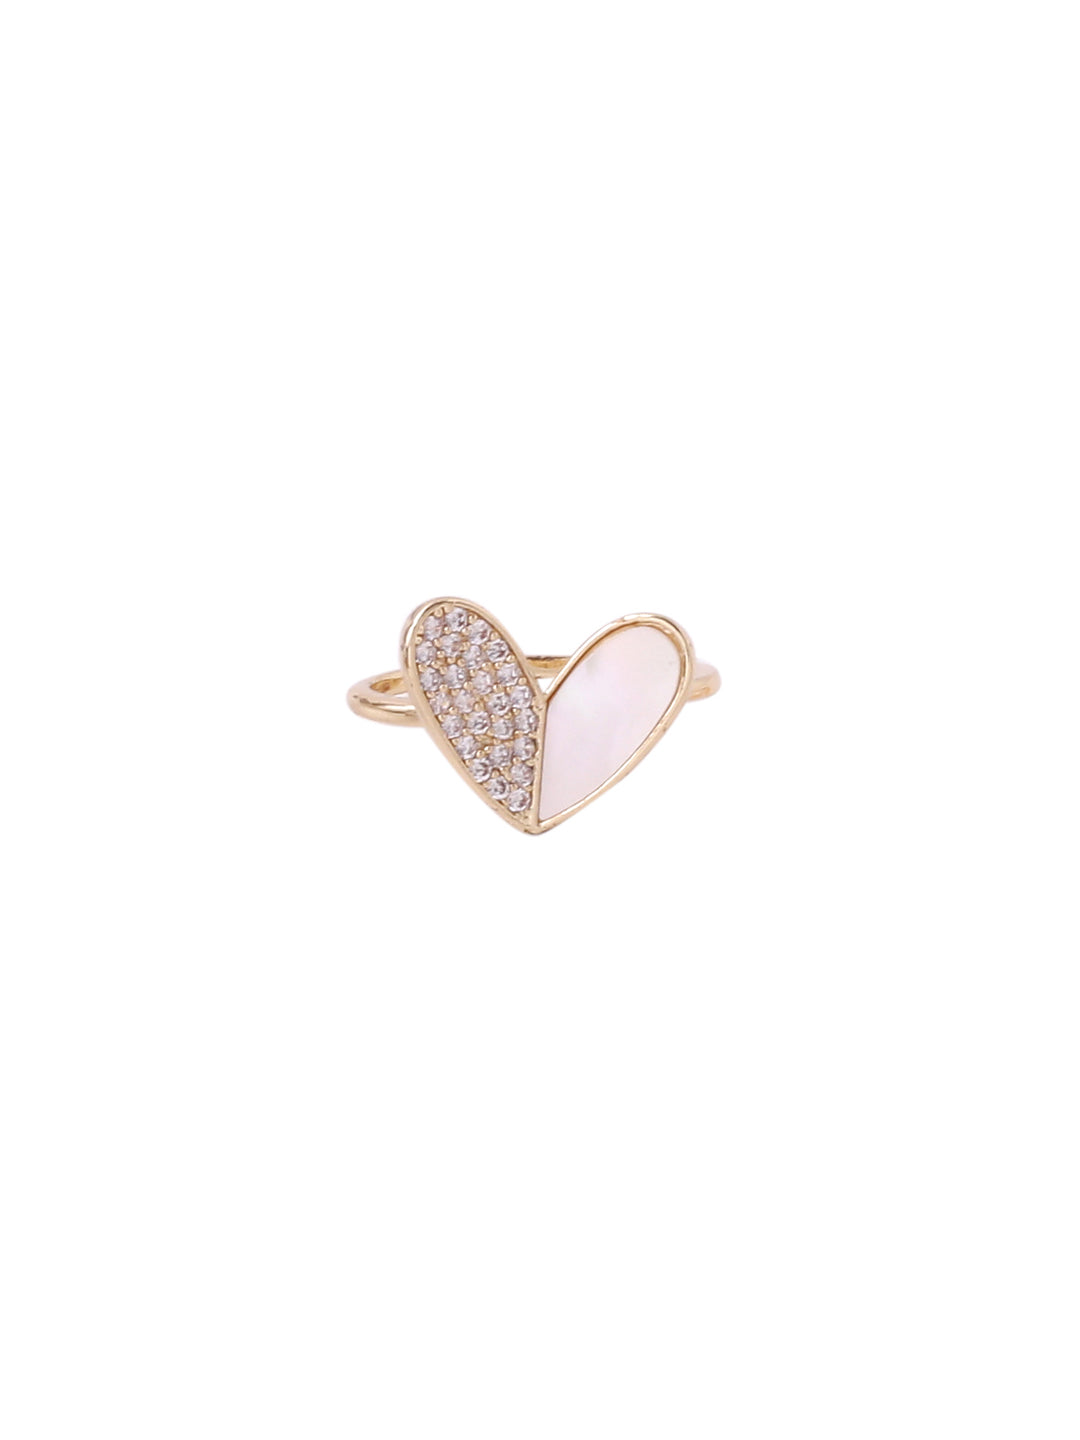 Women's Gold-Plated Stylish Ring with AD stones - NVR